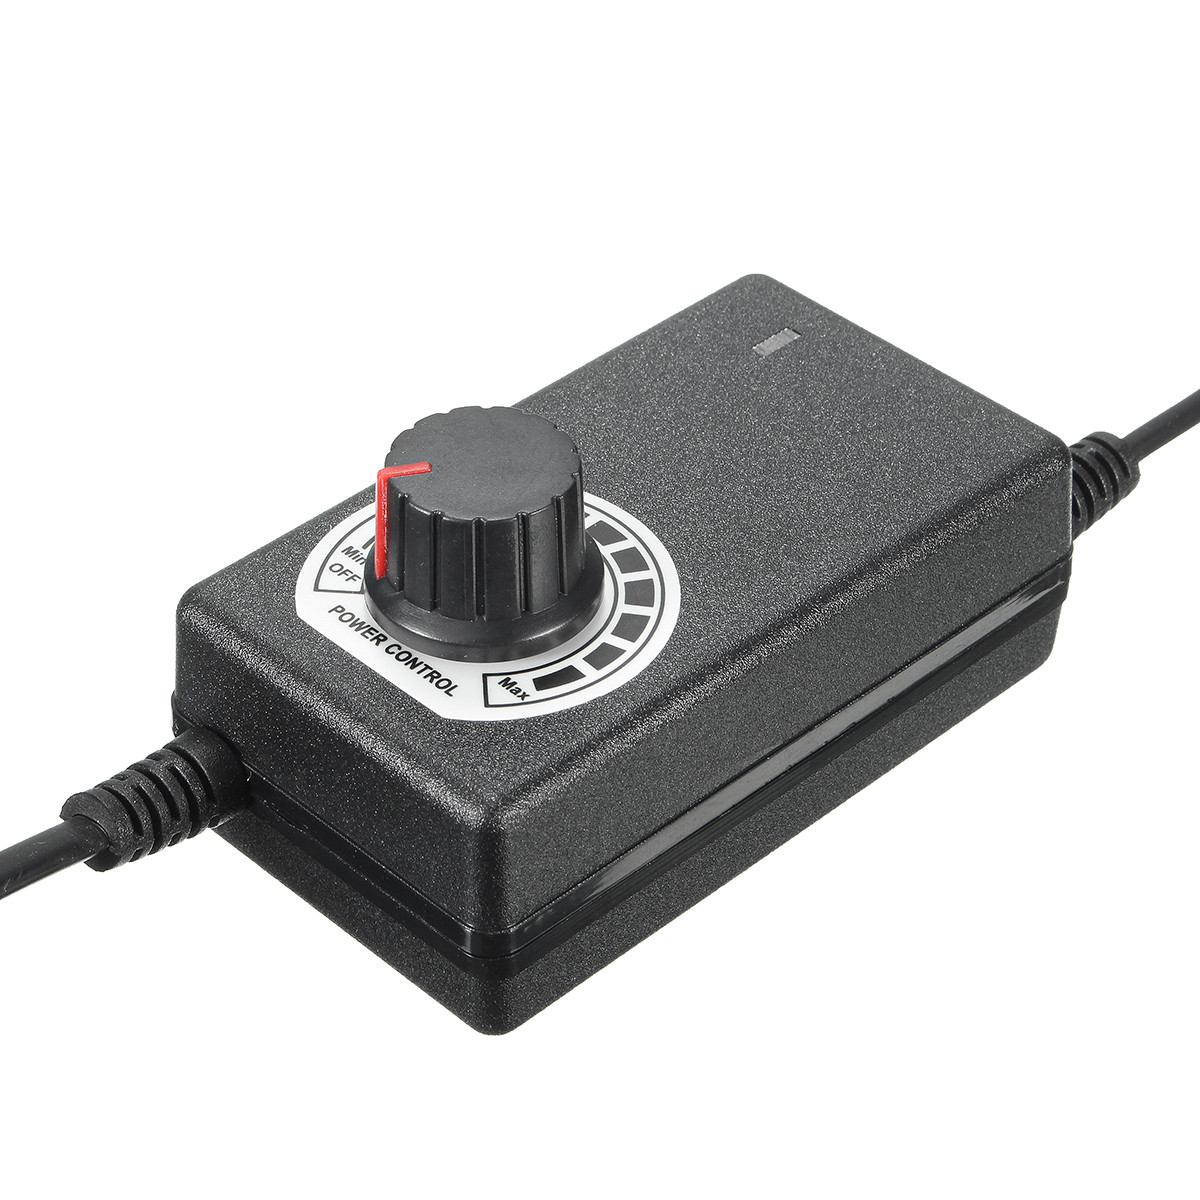 Excellwayreg-3-12V-2A-24W-Adjustable-ACDC-Adapter-Switching-Power-Adapter-Motor-Speed-Controller-1280687-5